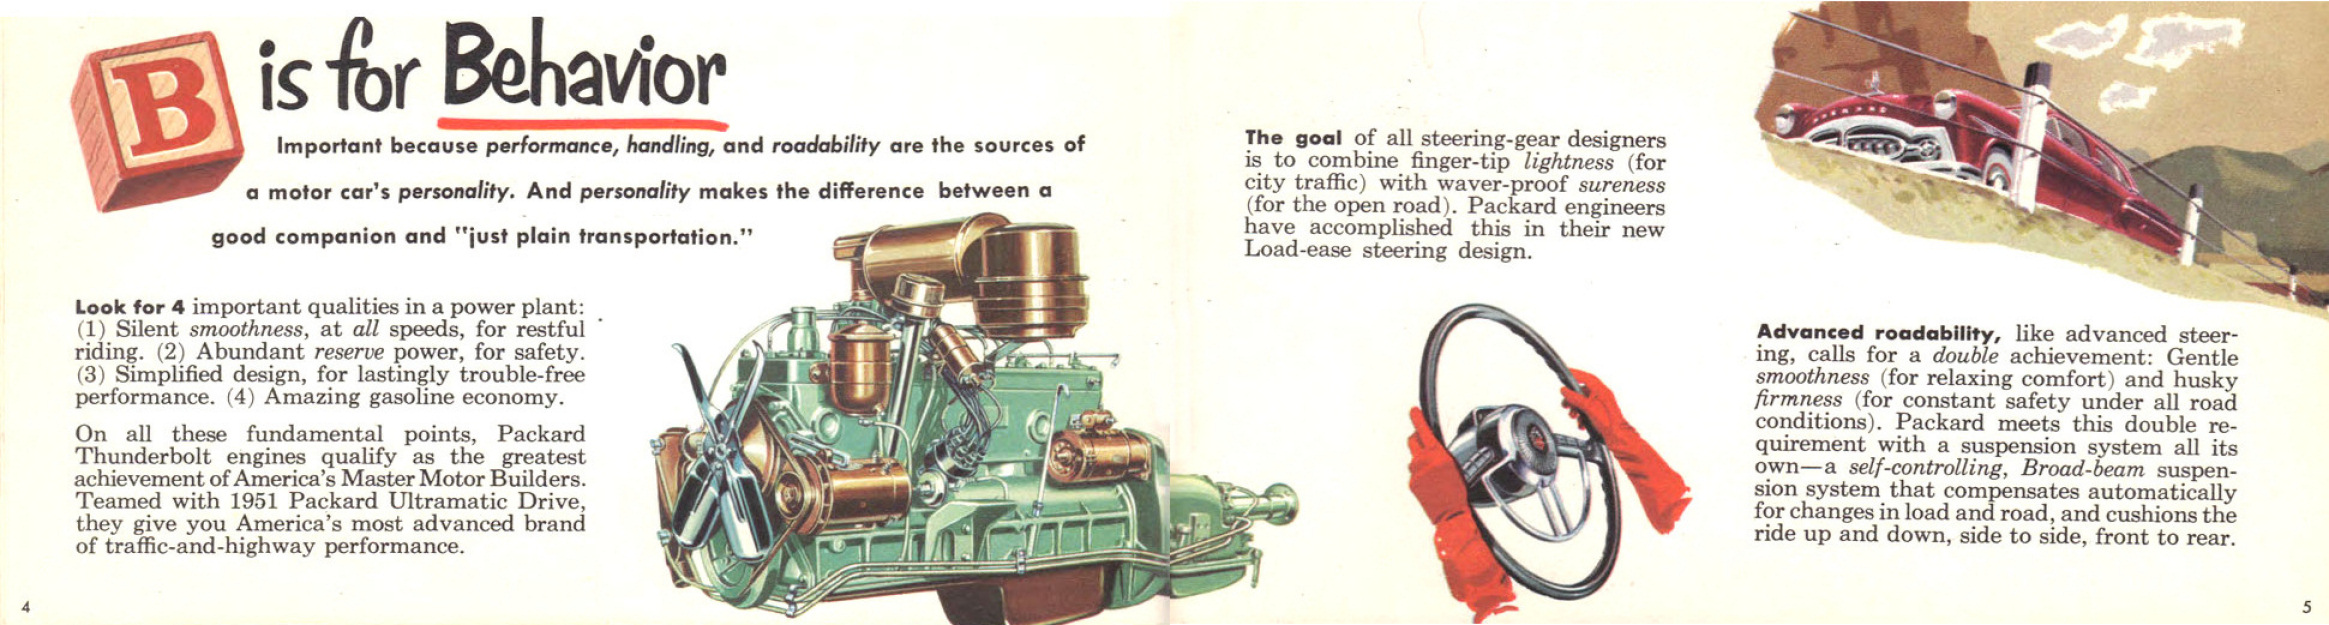 1951_Packard_ABCD_Booklet-04-05